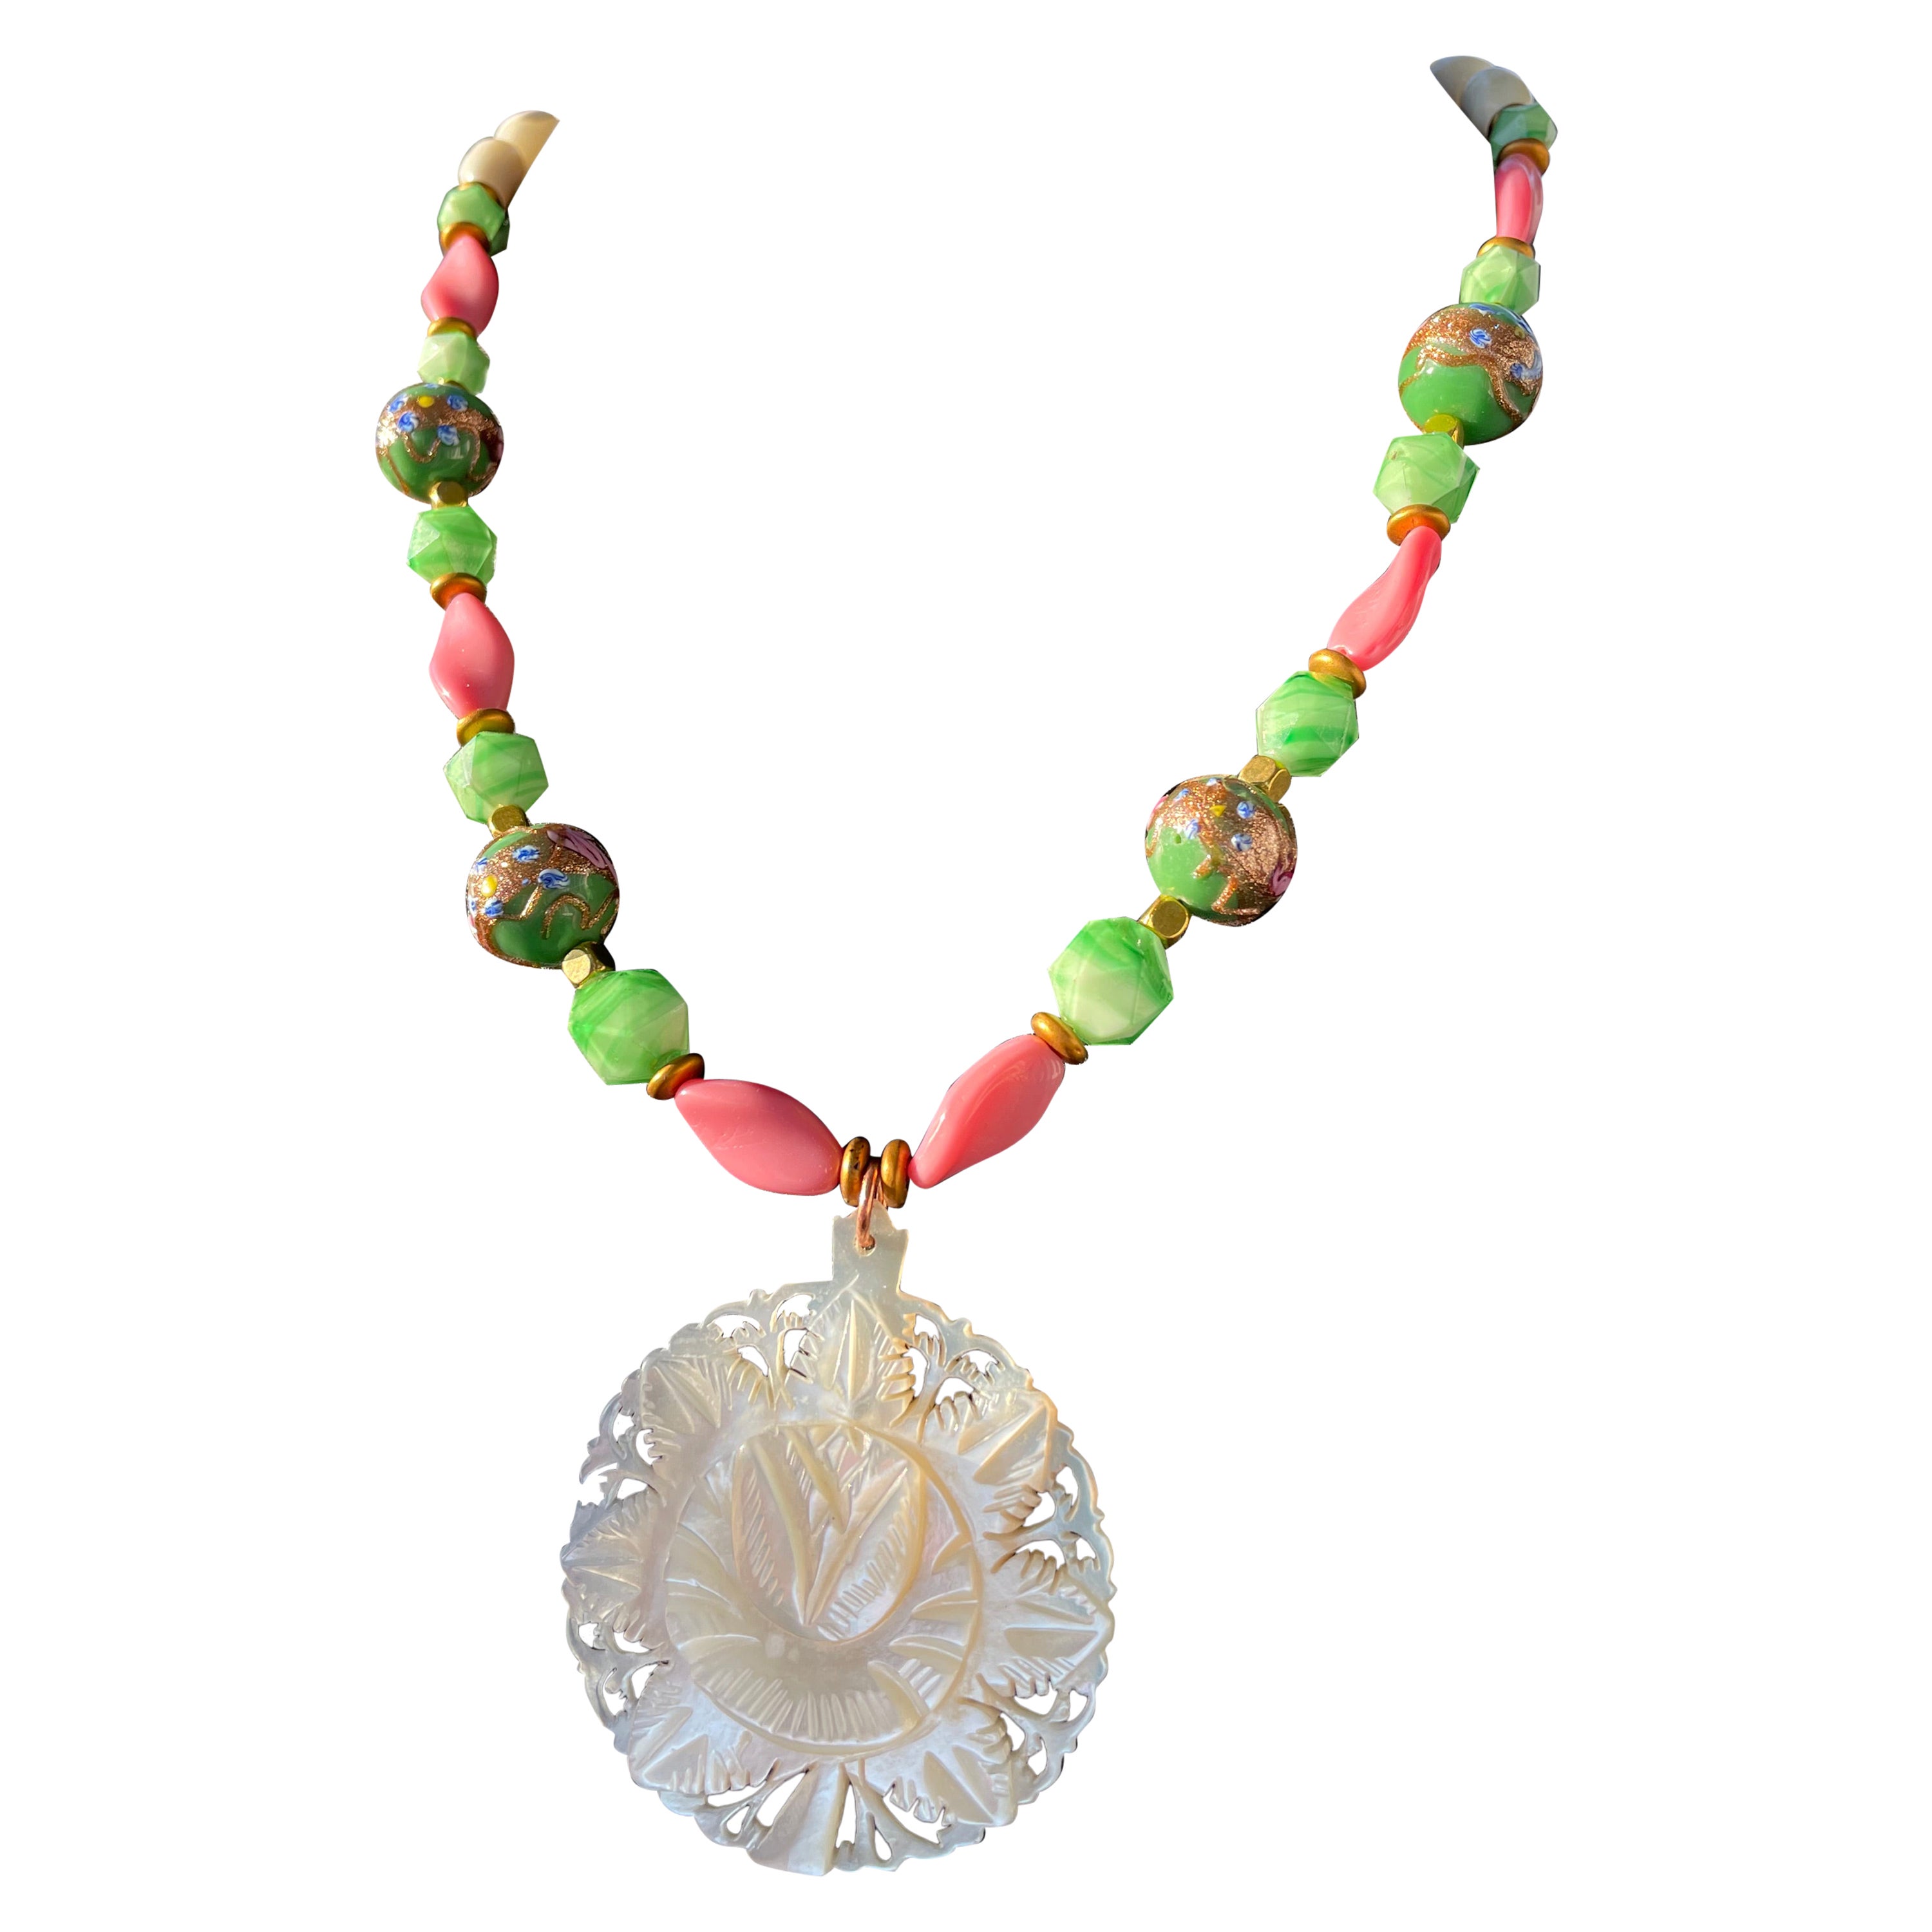 LB offers Vintage Carved Mother of Pearl medallion necklace with vintage glass For Sale